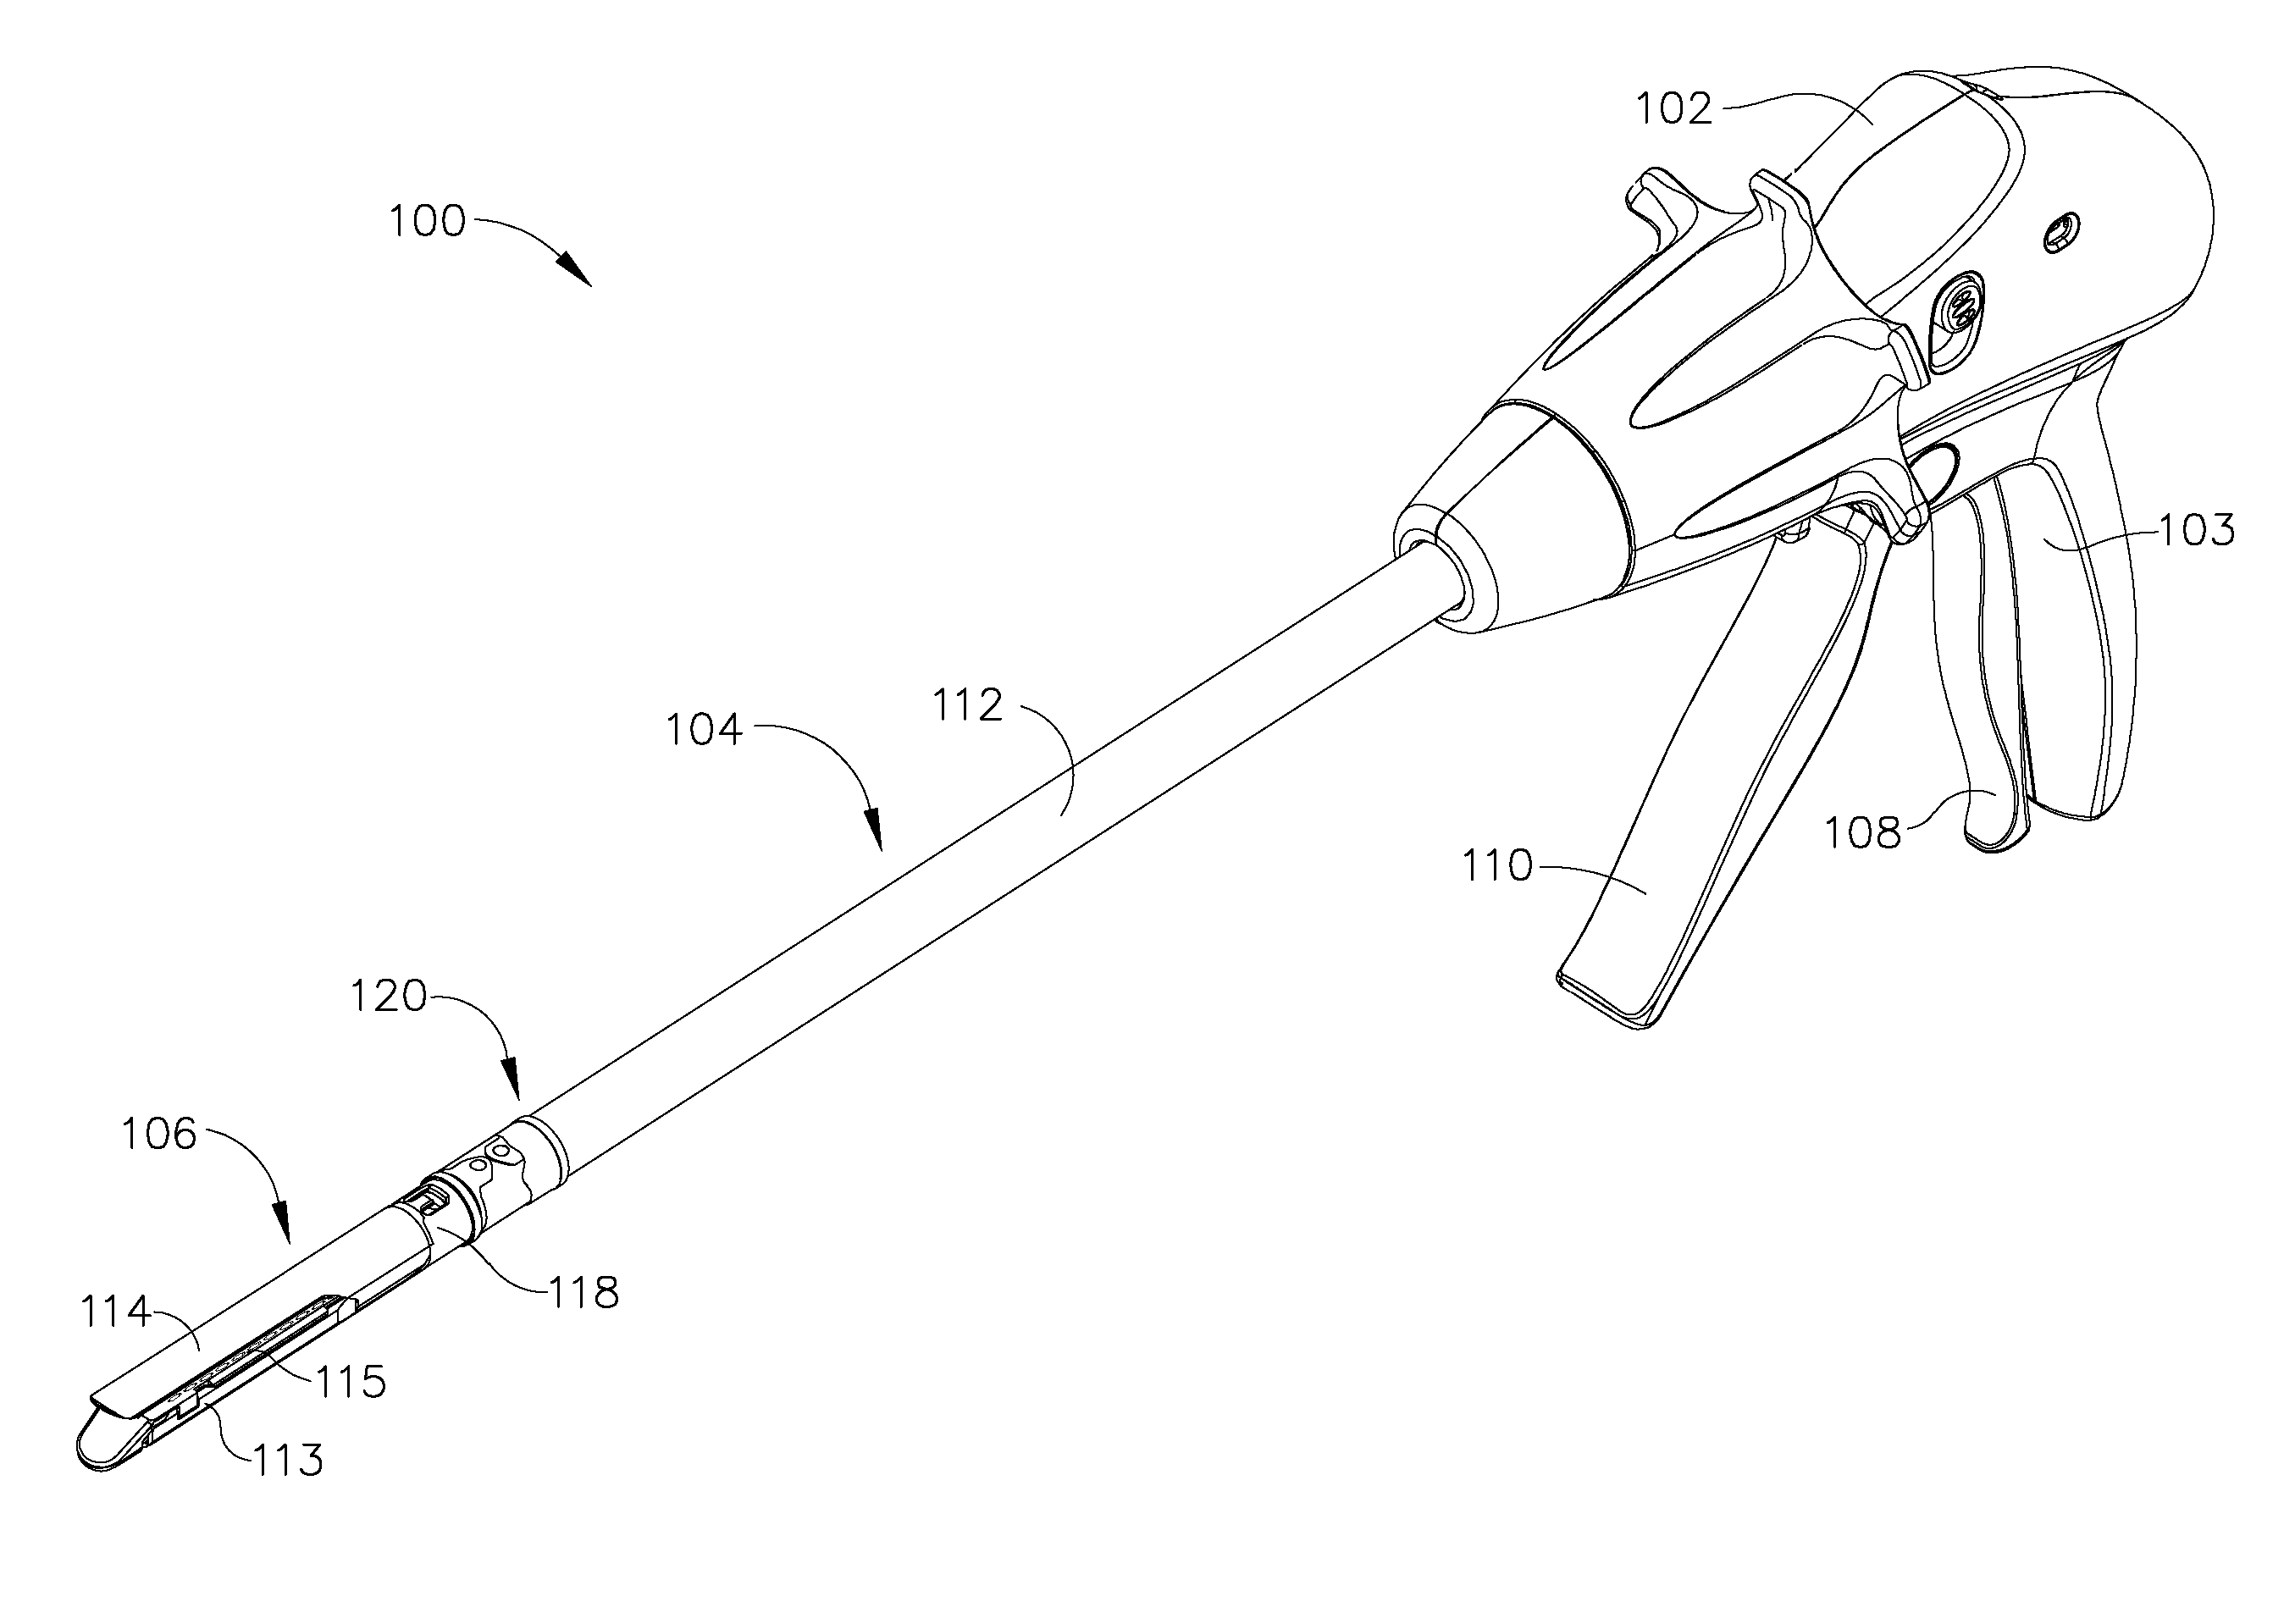 Surgical stapling instrument comprising an articulation joint